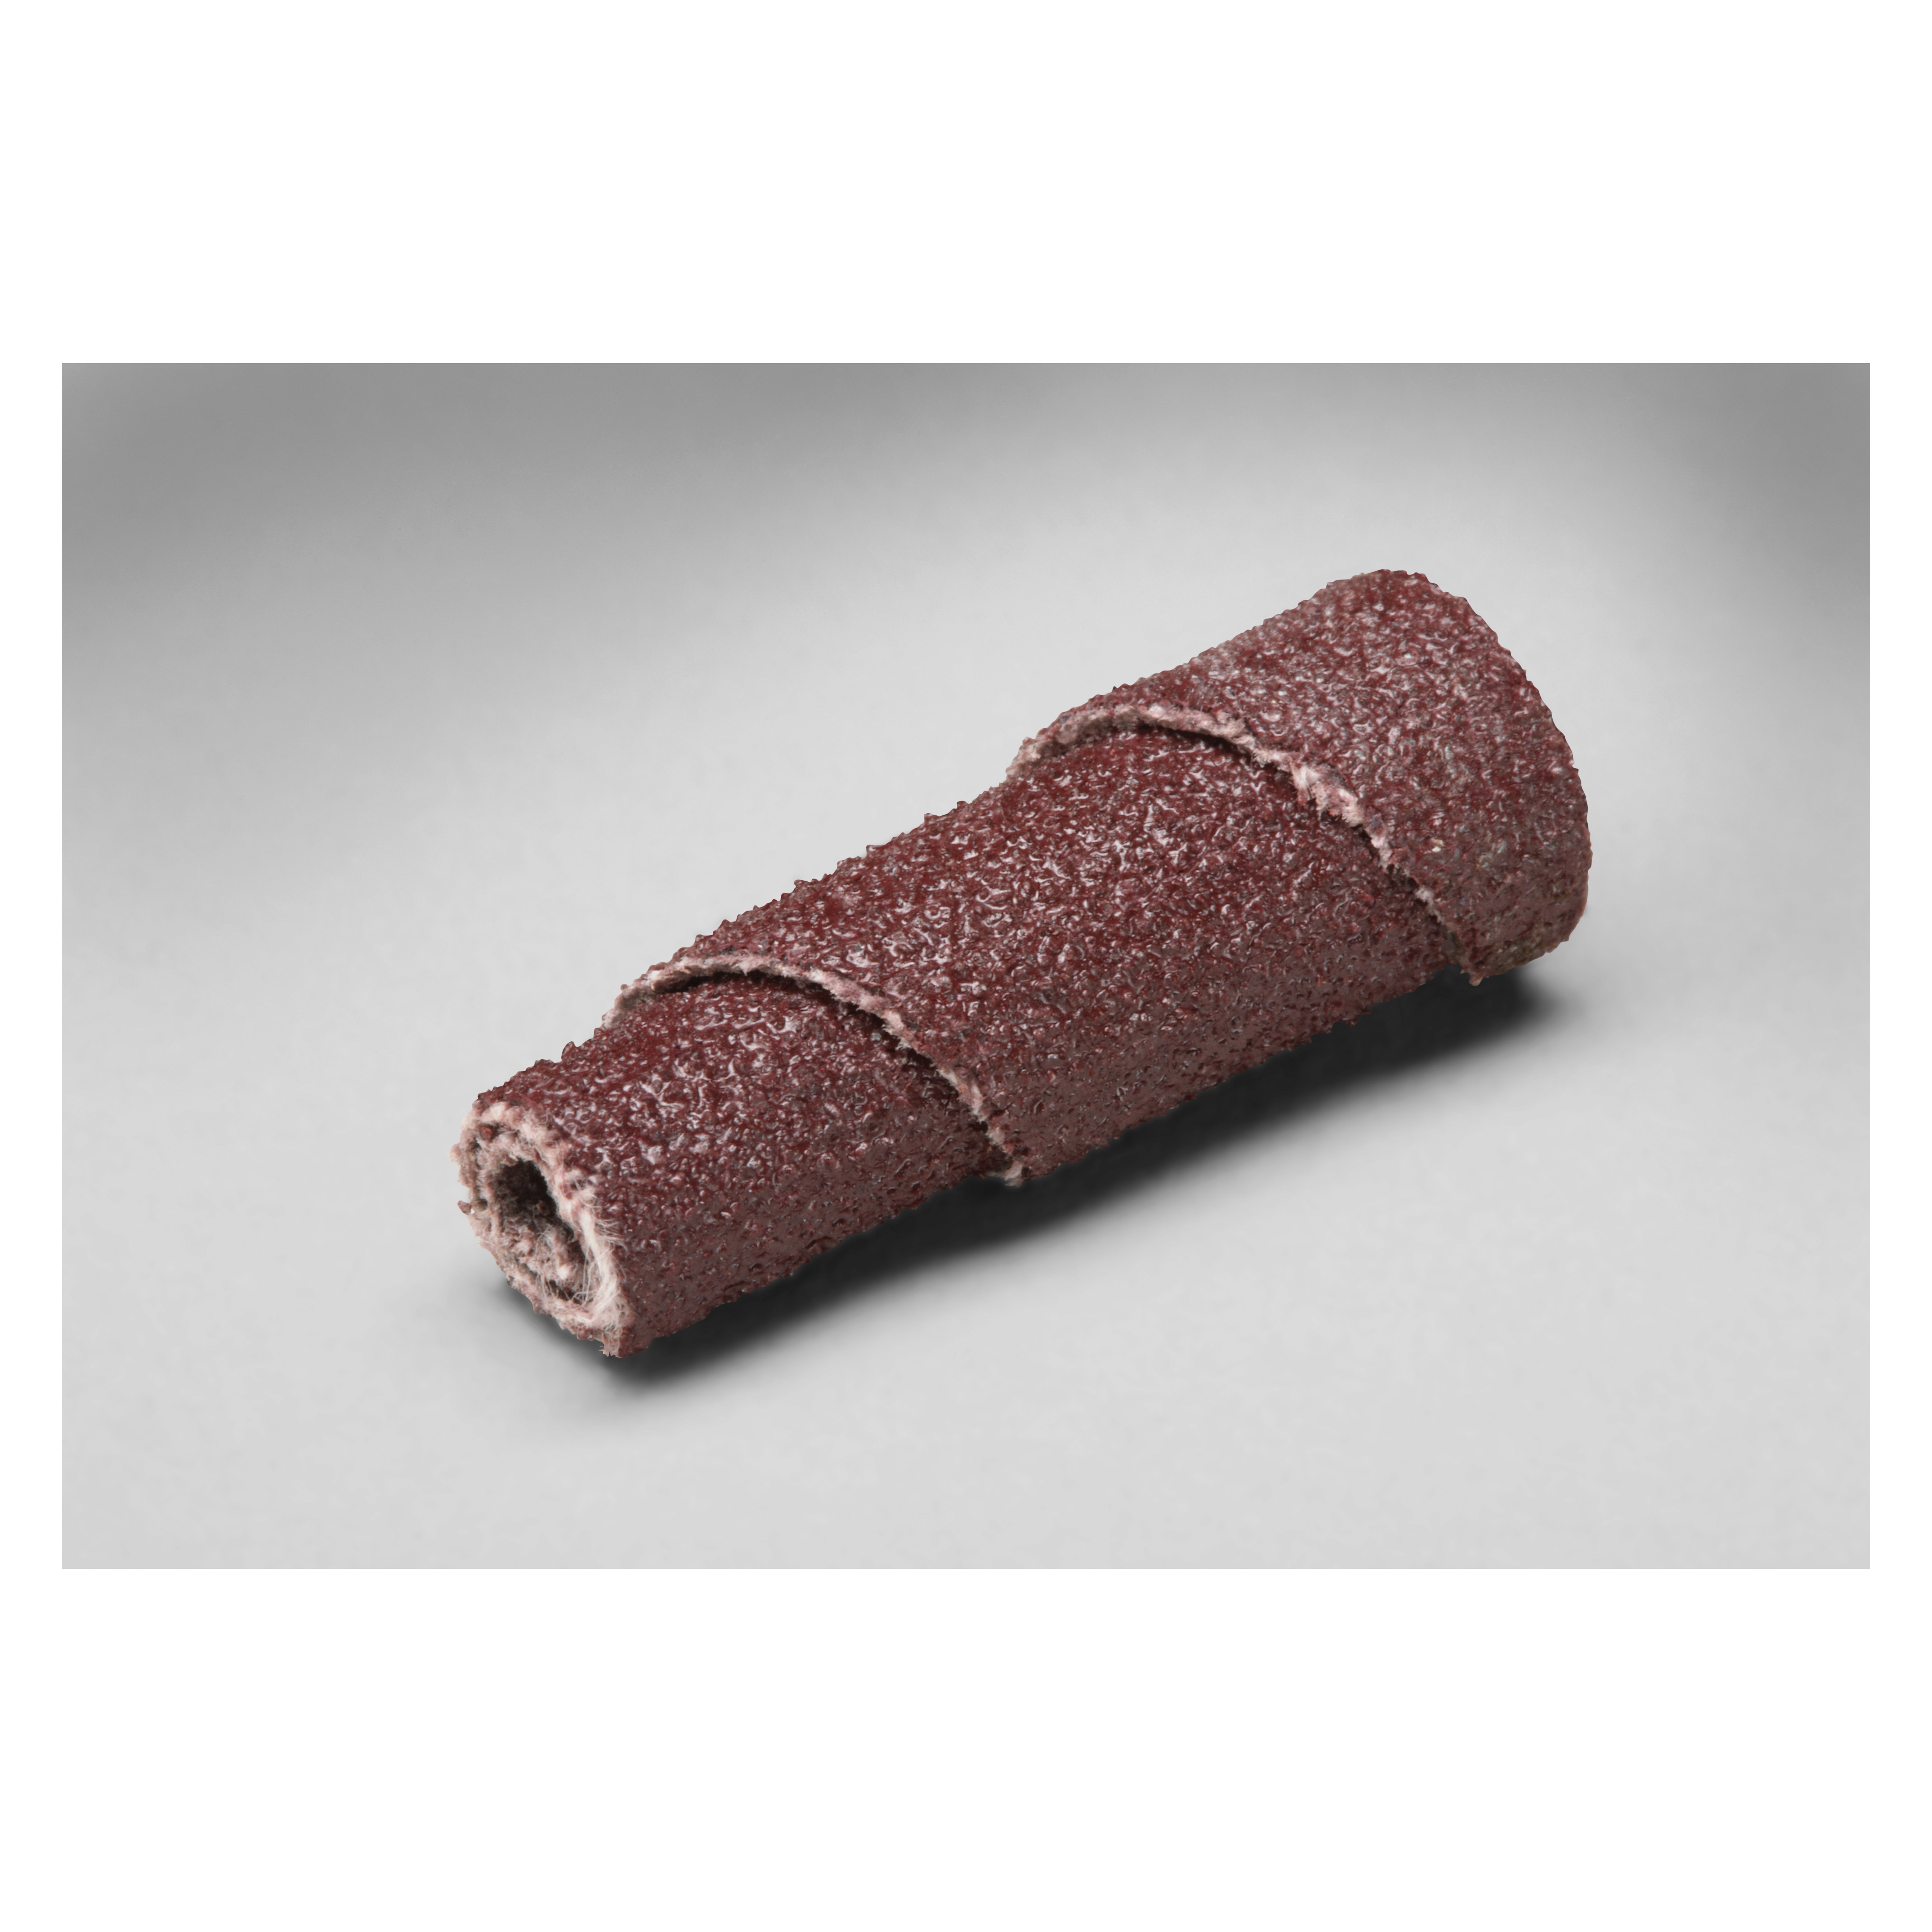 3M™ 051144-97239 341D Coated Full Tapered Coated Cartridge Roll, 3/8 in Dia x 1 in OAL, 1/8 in Dia Pilot Hole, 60 Grit, Aluminum Oxide Abrasive